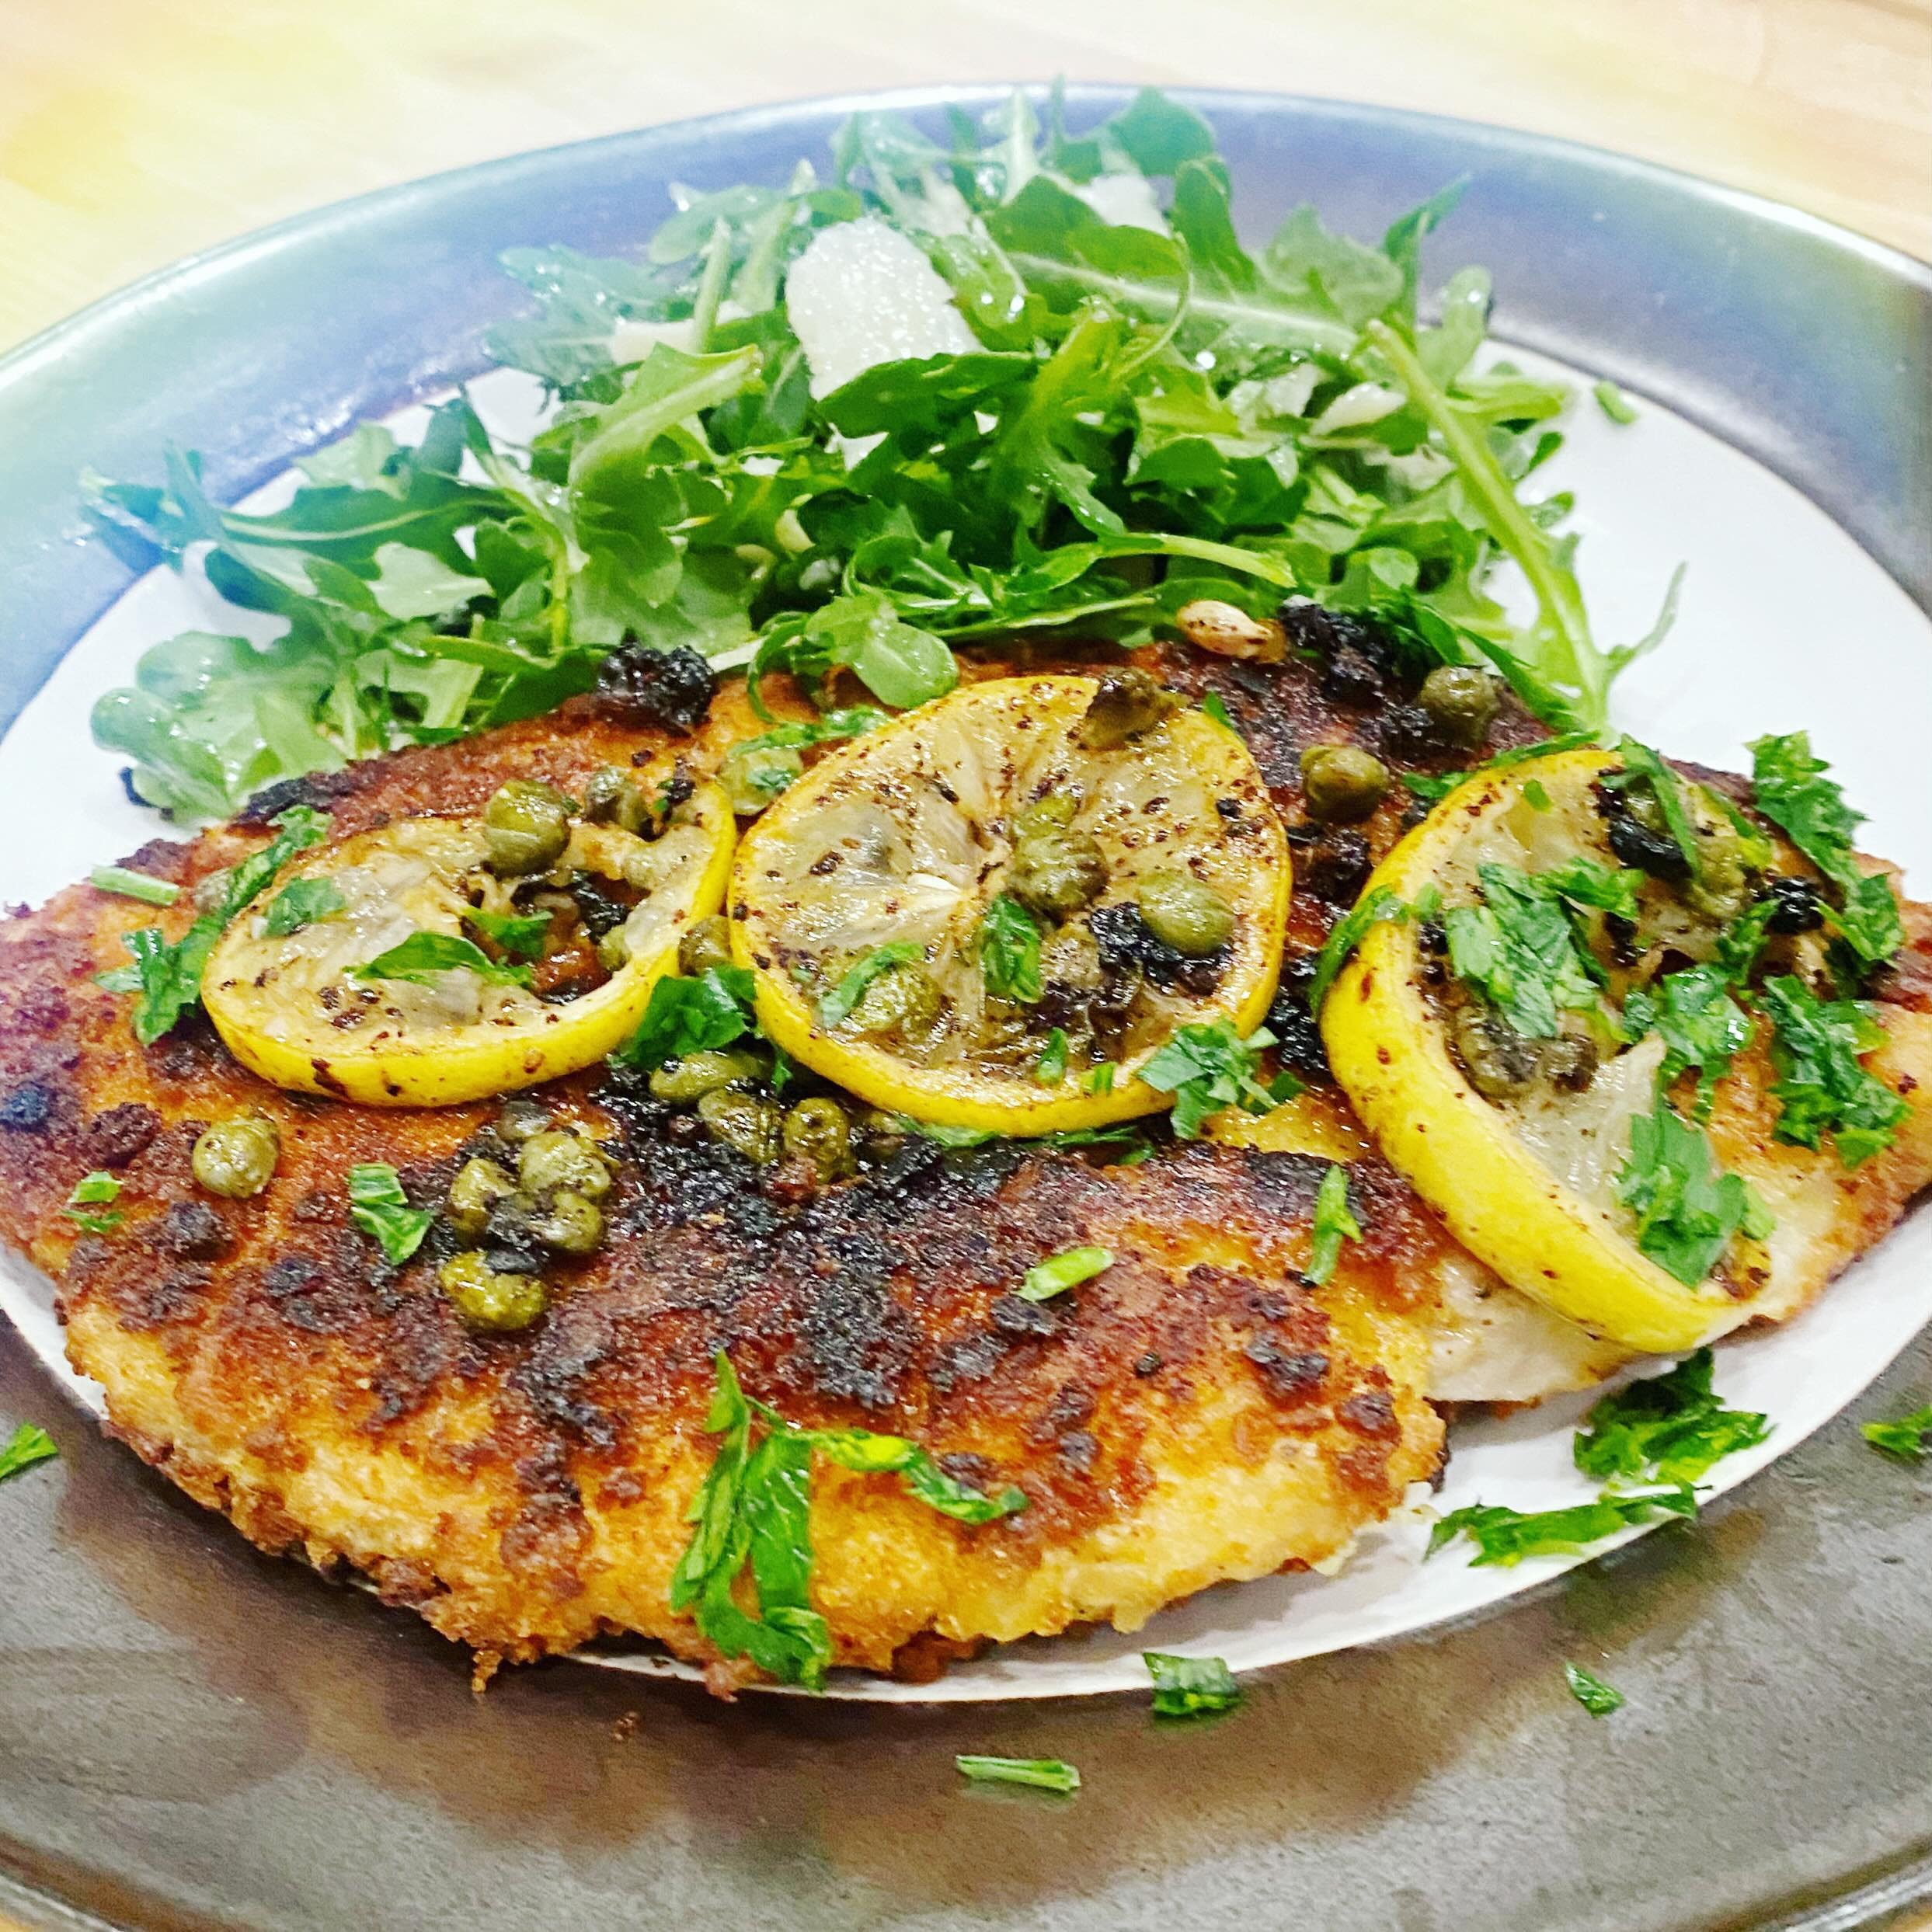 Chicken Milanese is basically Italian fried chicken&mdash;only better. I serve mine with a tangy lemon, caper, and wine reduction that layers flavor and cuts through the richness of the breading. This is traditionally served with an arugula salad, wi